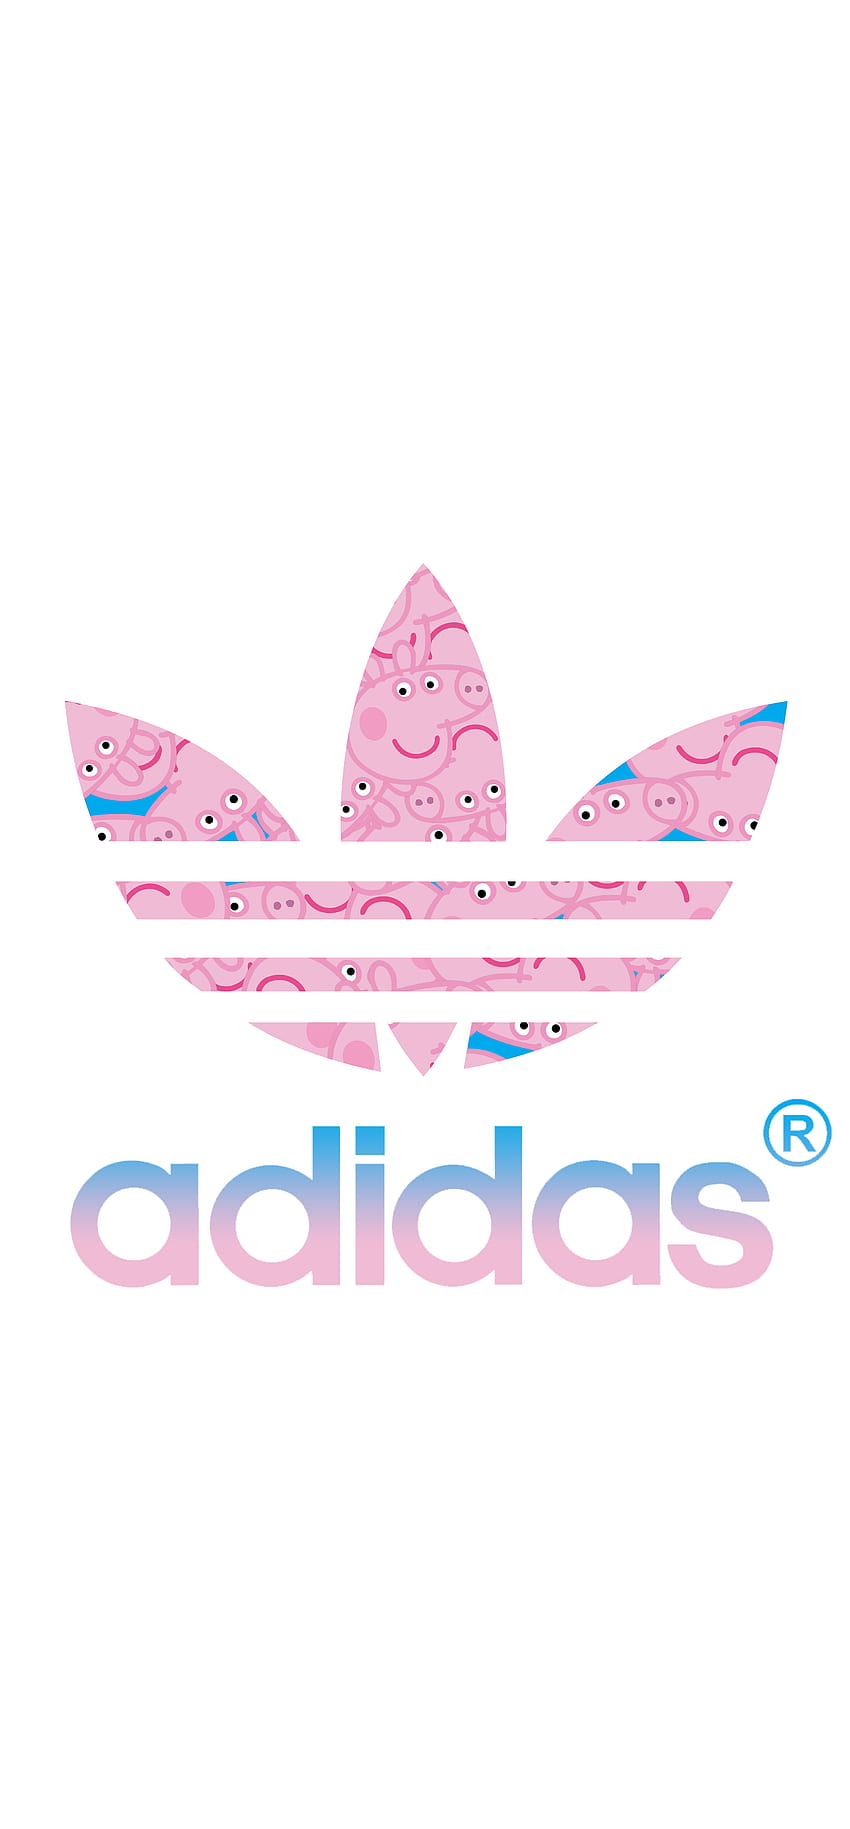 MEME I just find the whole peppa pig bootlegs funny so I made it into a that would make me smile: streetwear HD phone wallpaper